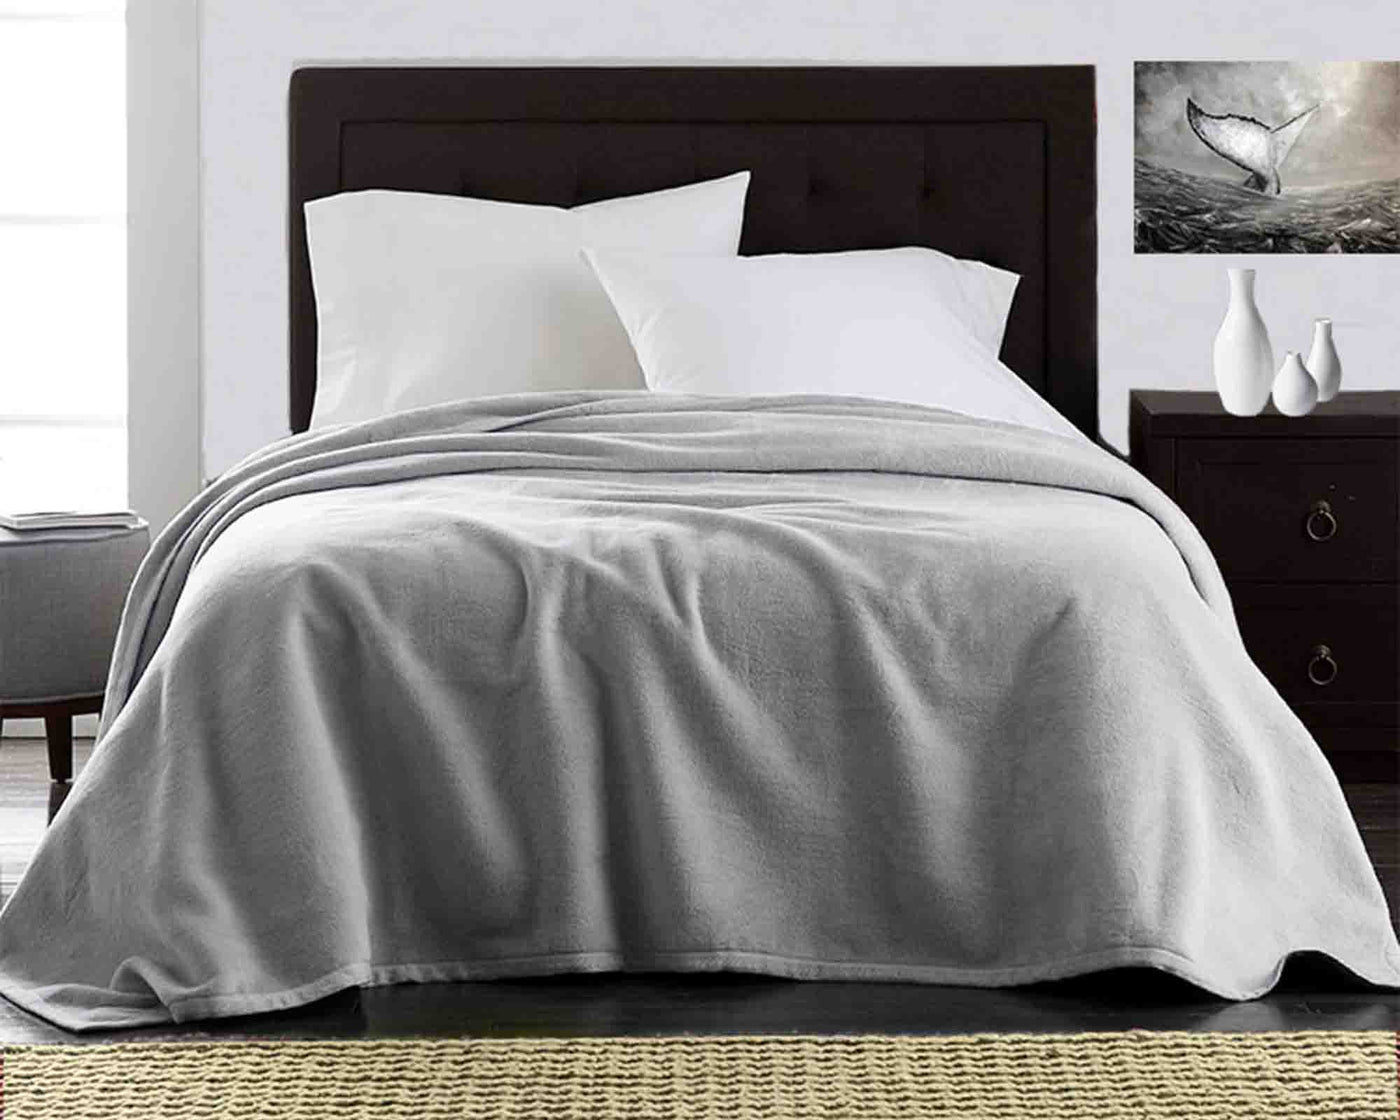 Light grey ultra plush fleece blanket with white hypoallergenic pillowson the bed#colour_light-grey